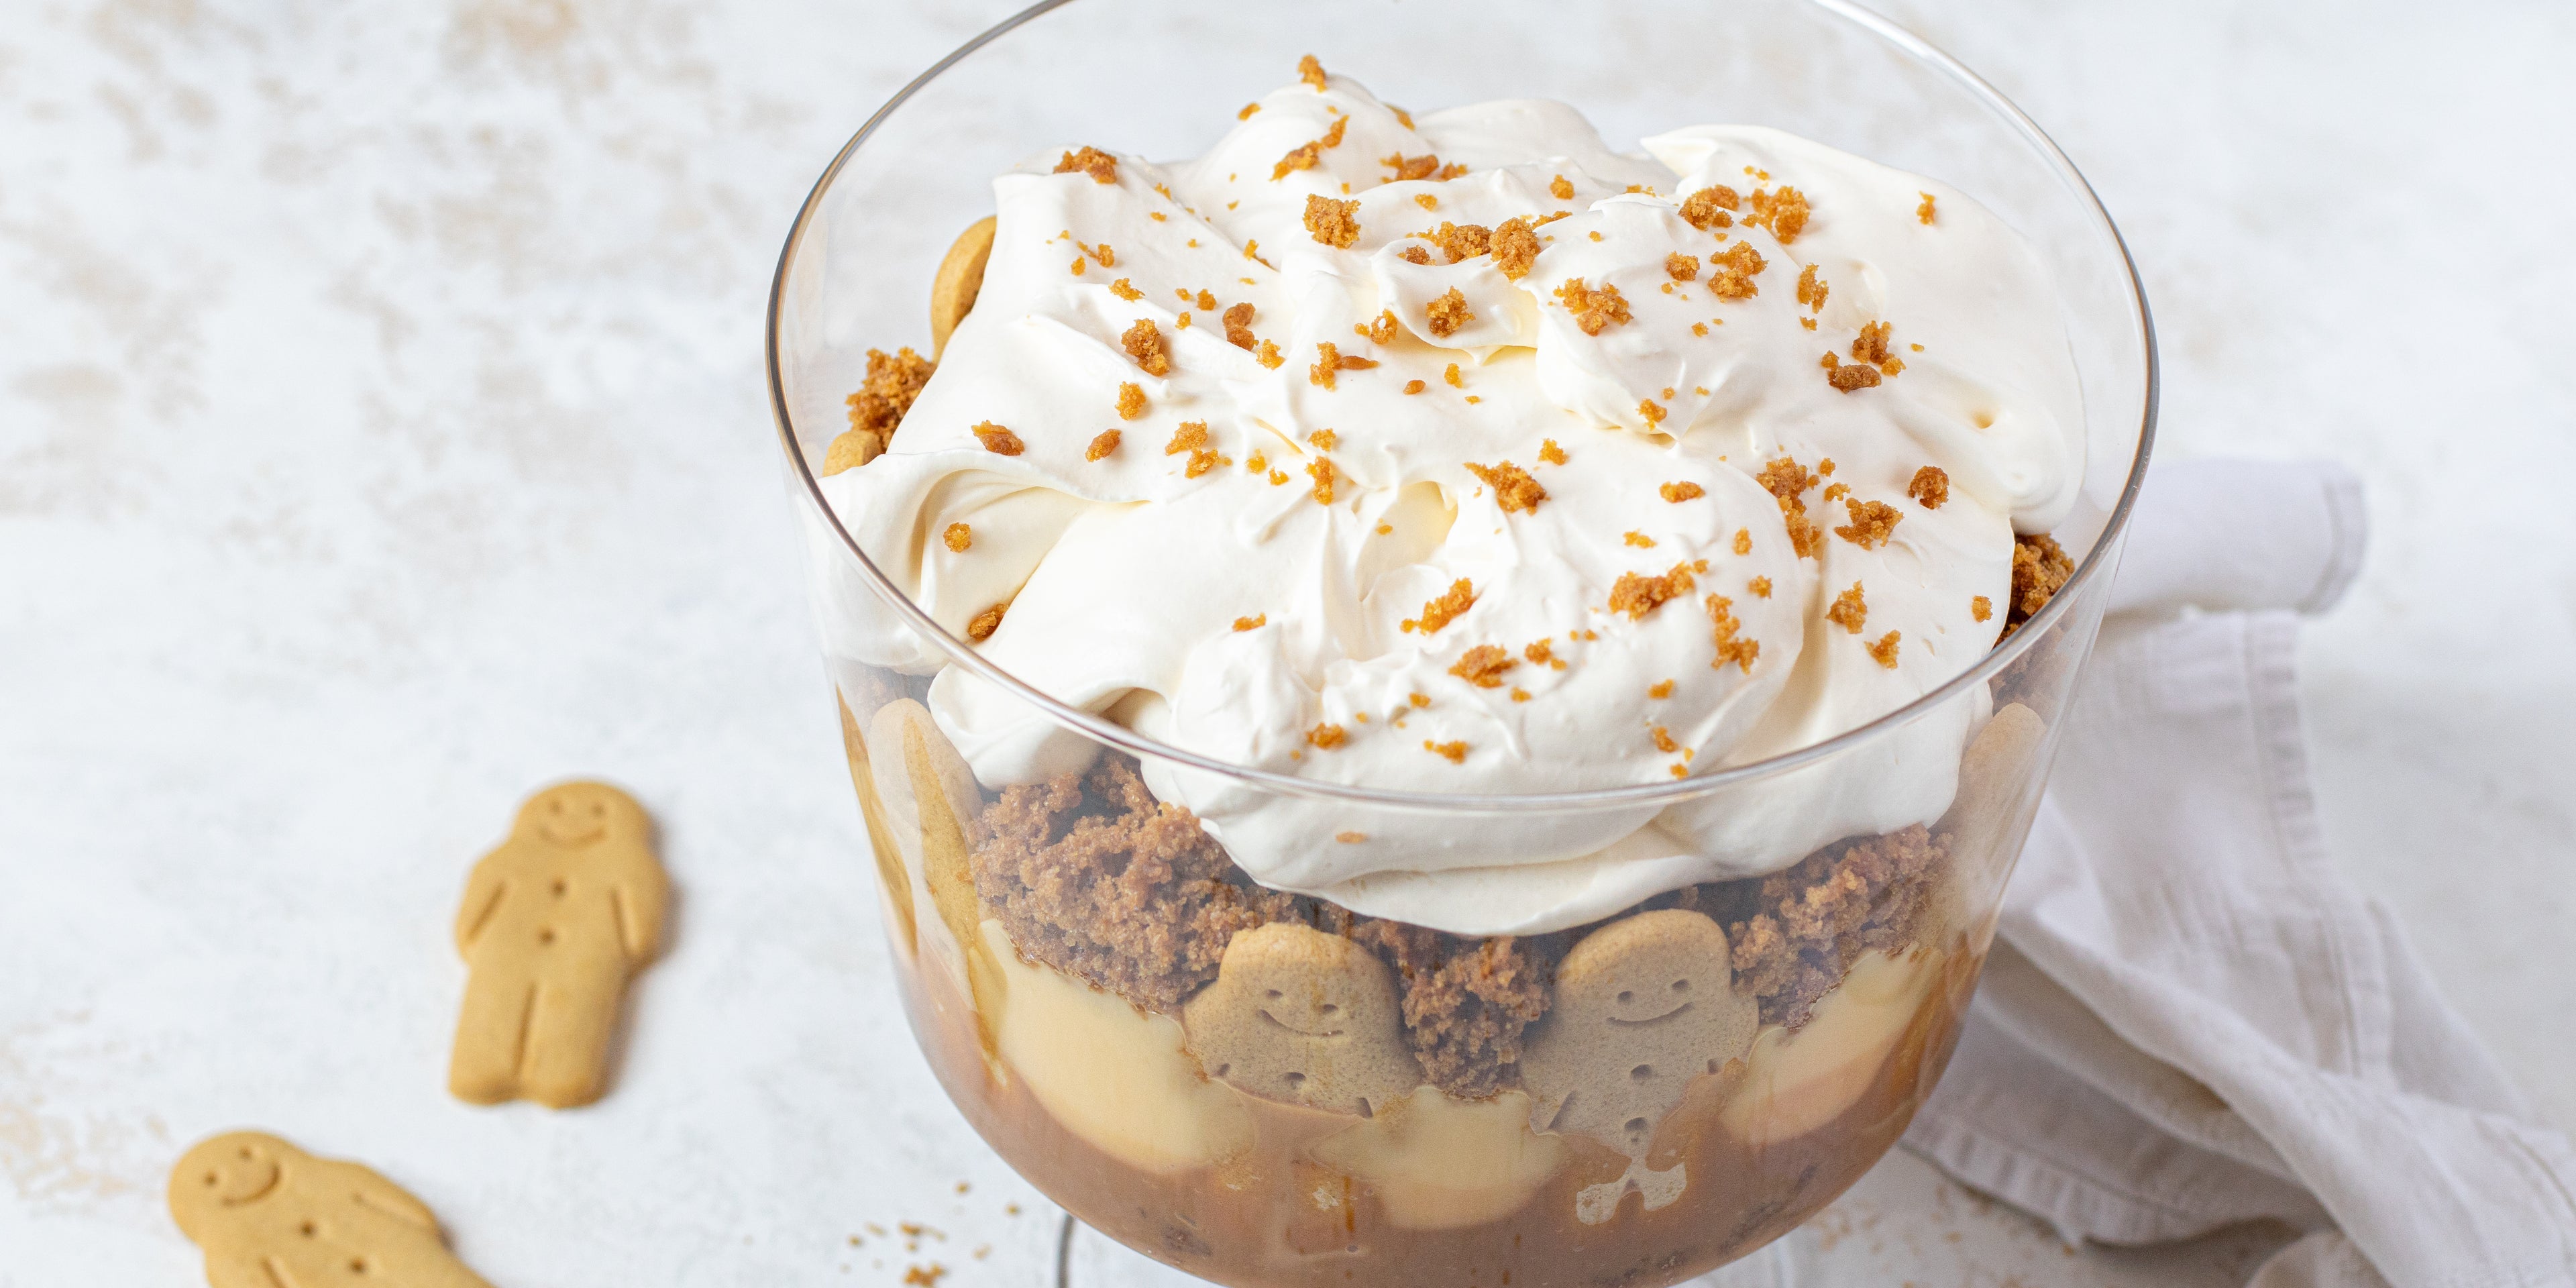 Top view of Gingerbread Trifle sprinkled with gingerbread crumbs. Gingerbread men scattered around the trifle